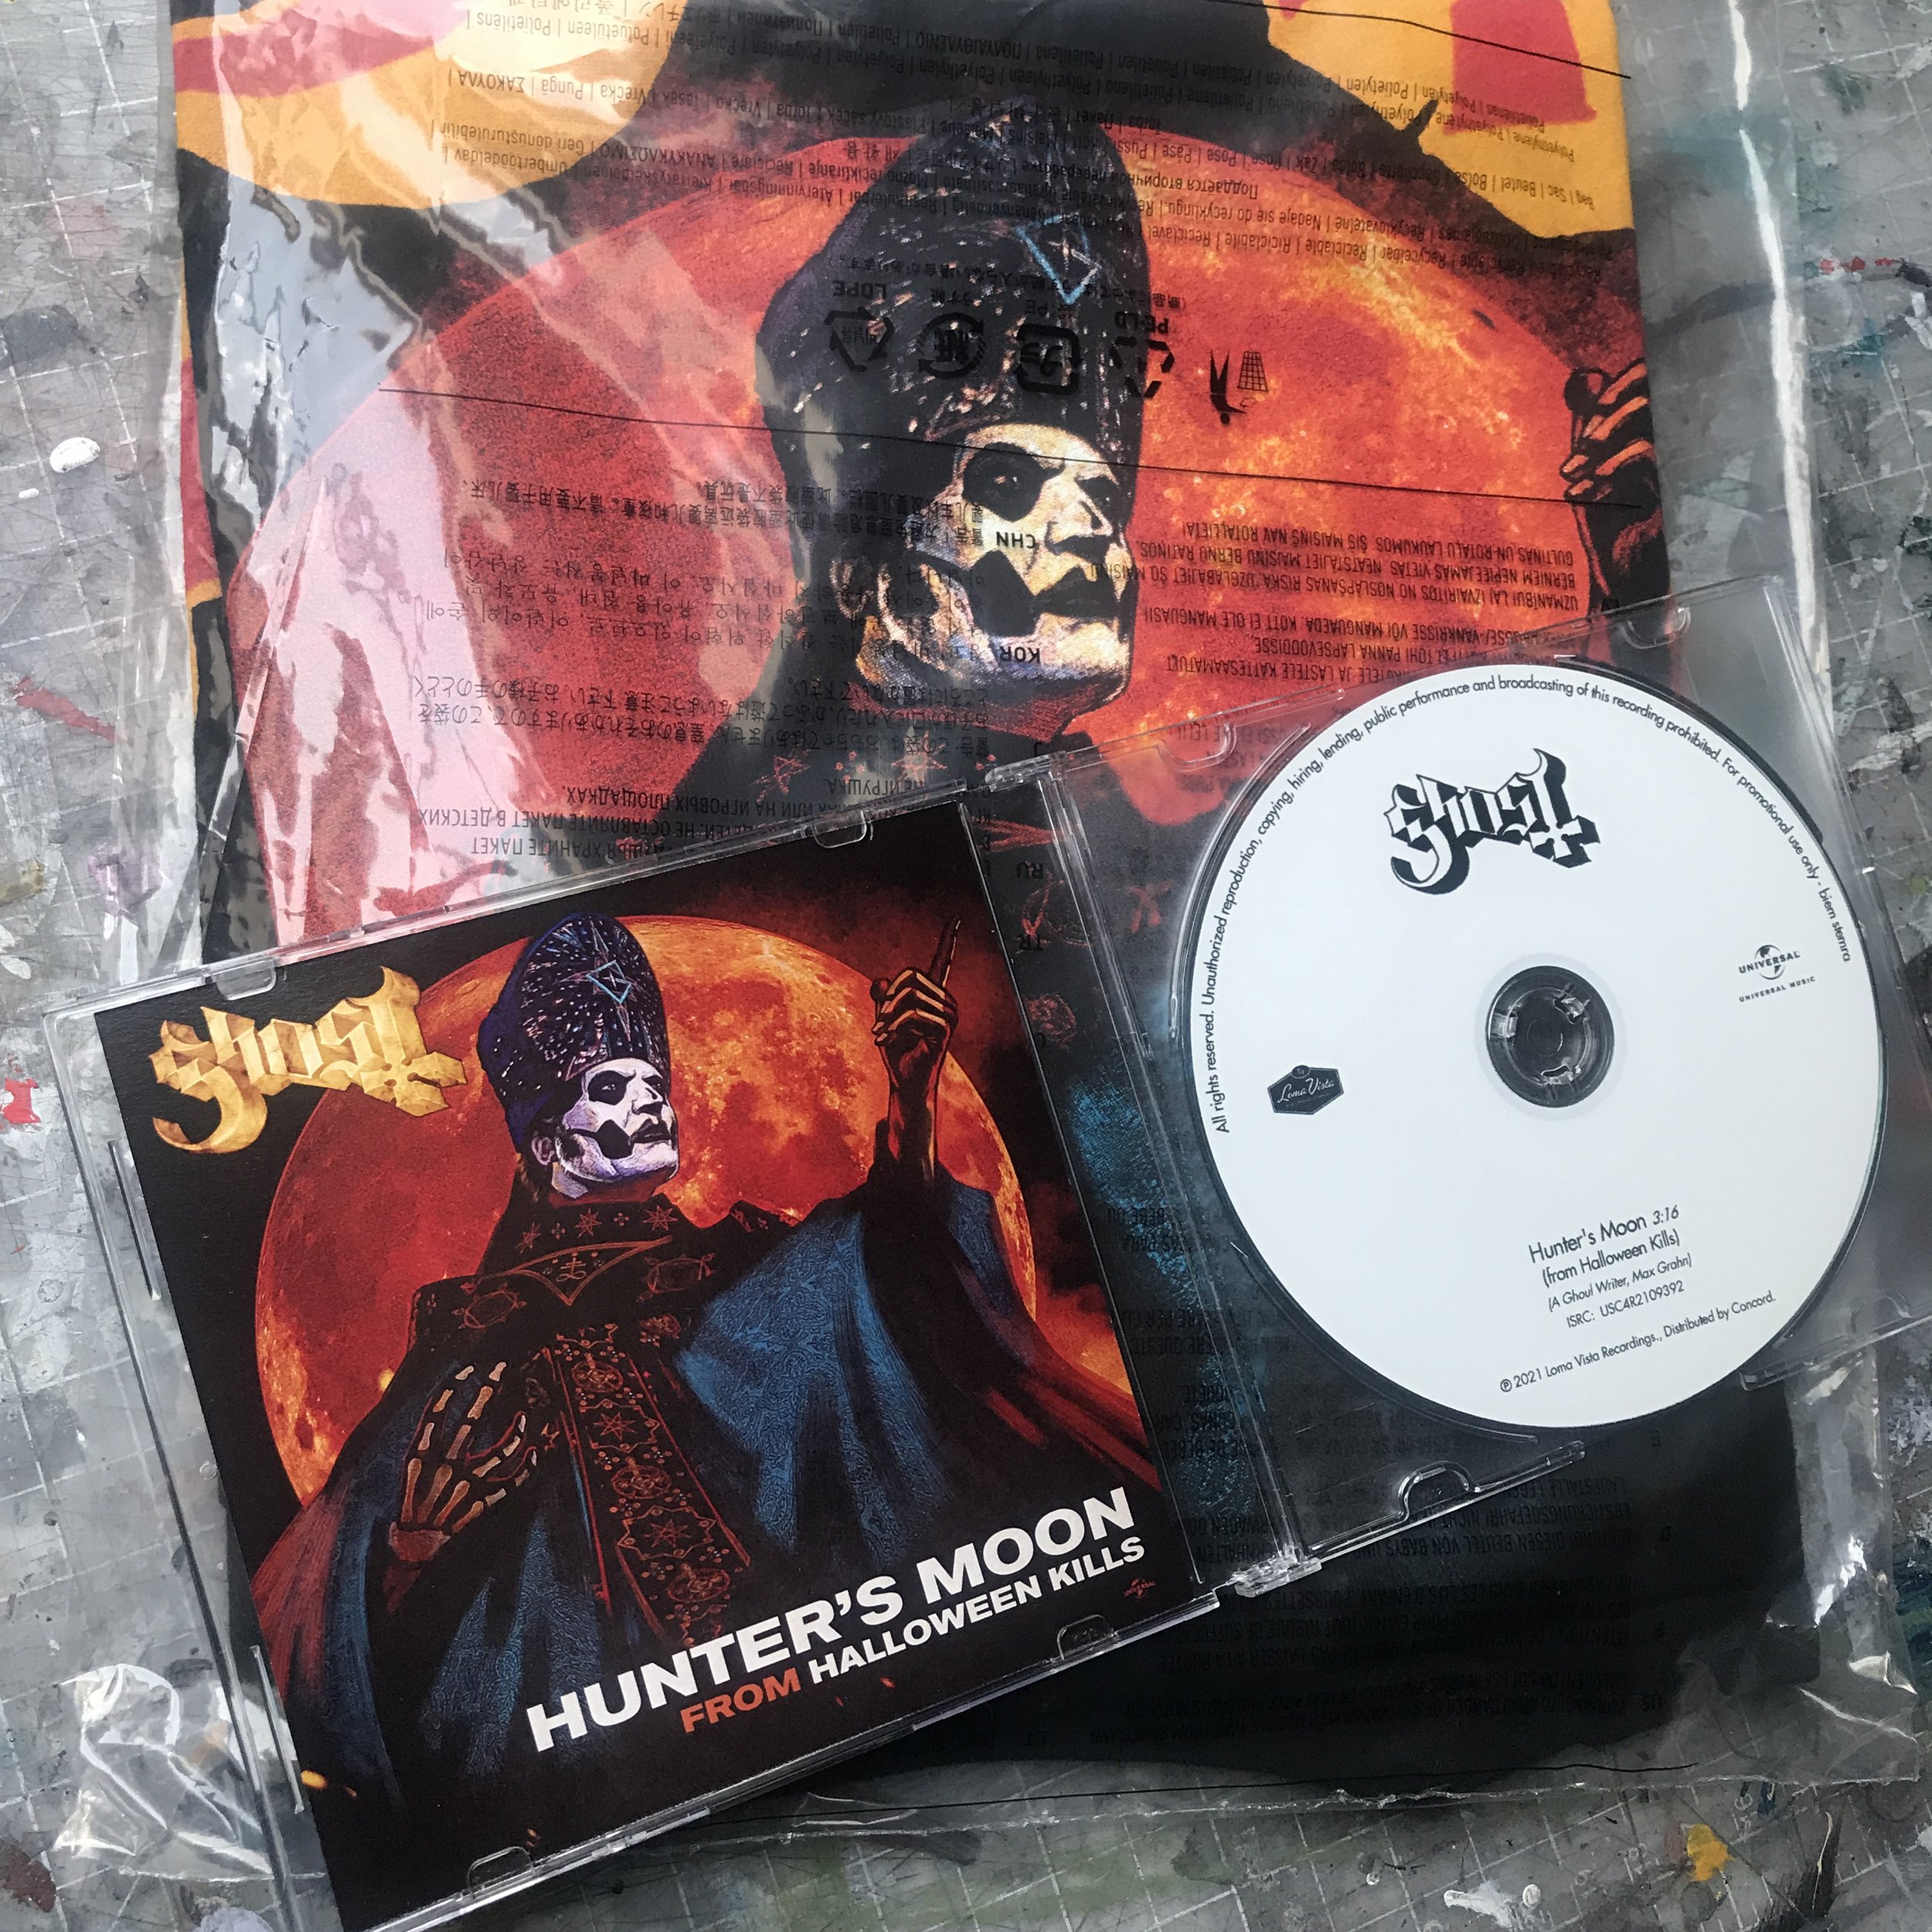   GHOST |  Hunter’s Moon   |  Promo CDr single |  from the Halloween Kills movie soundtrack    